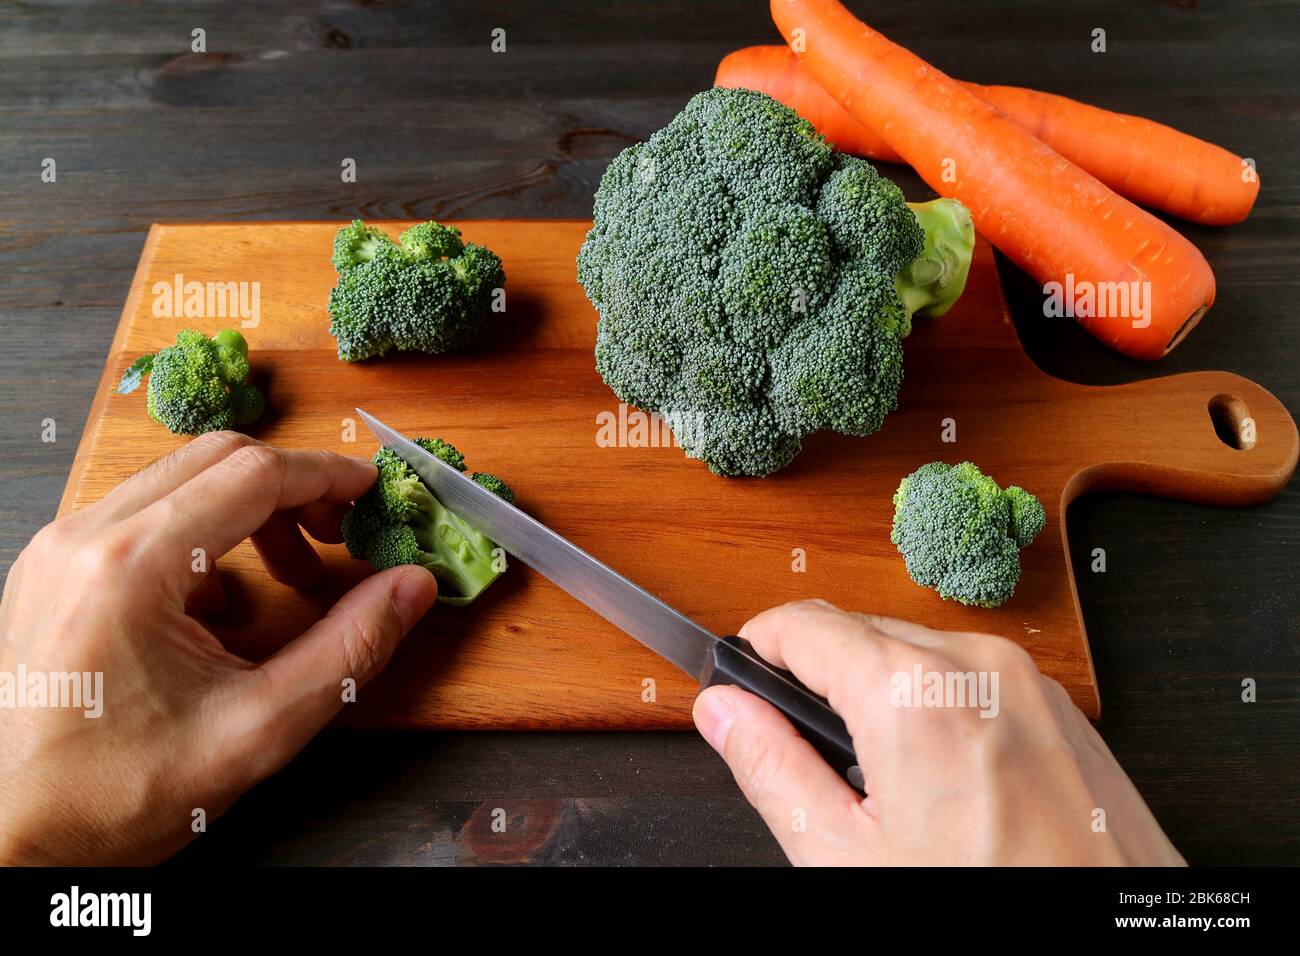 Hand Cutting Raw Broccoli on Wooden Chopping Board with Blurry Carrots in the Backdrop Stock Photo